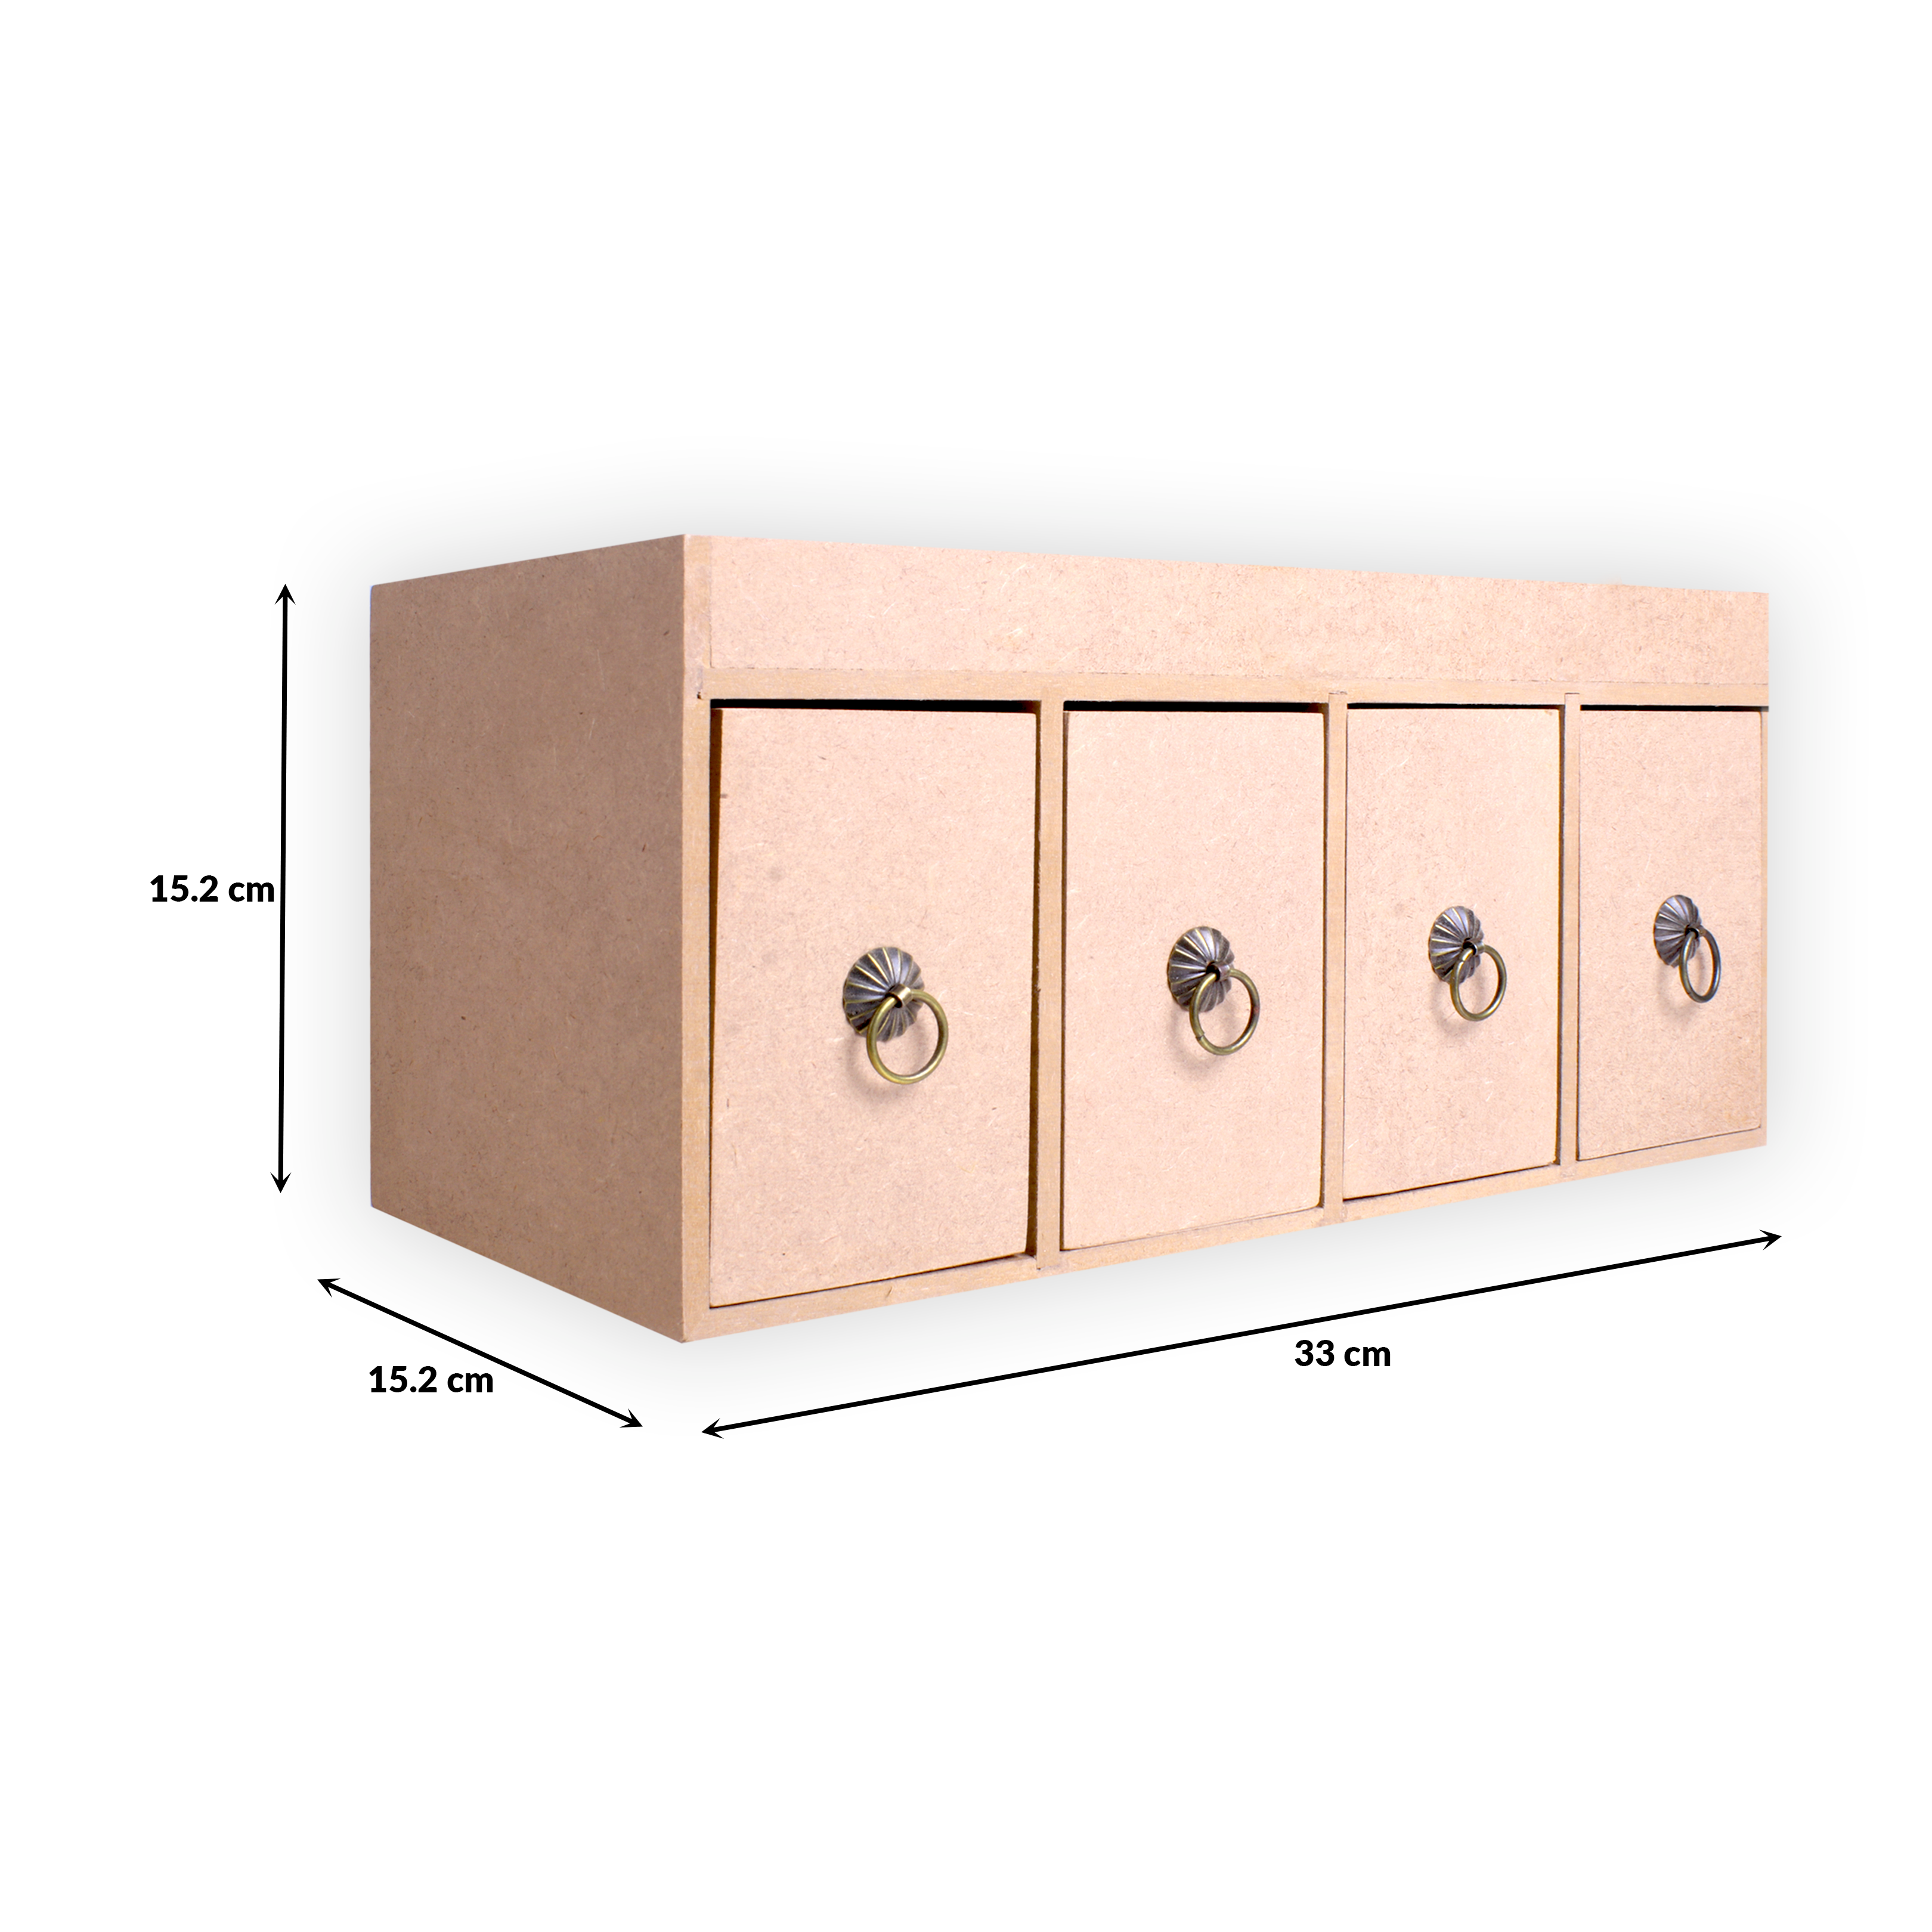 MDF Table Organizer With Drawers Approx L33 X W15.2 X D15.2cm 5.5mm Thick 1pc